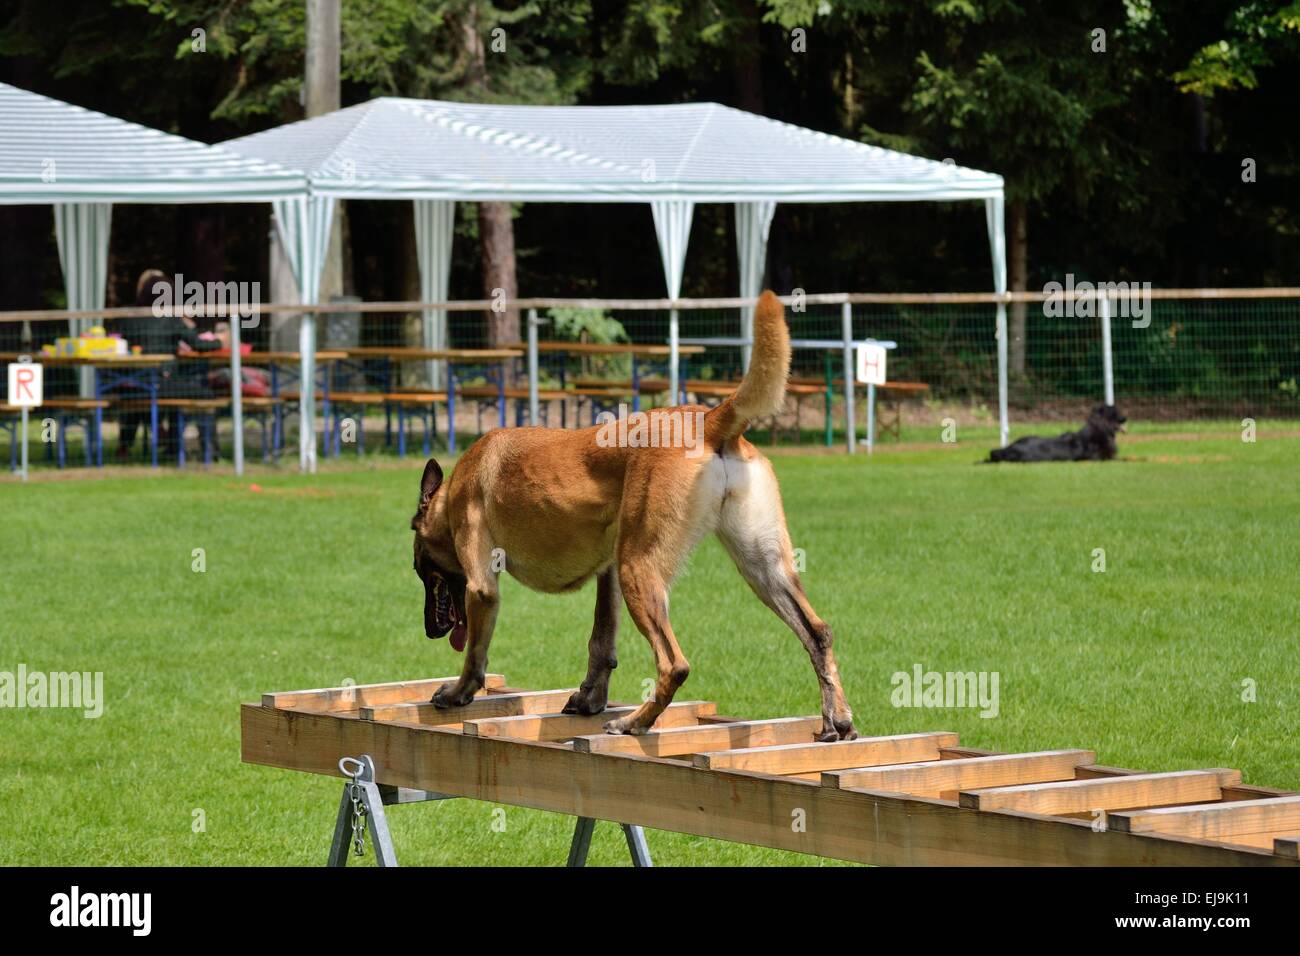 Malinois dogs on a rescue ladder Stock Photo